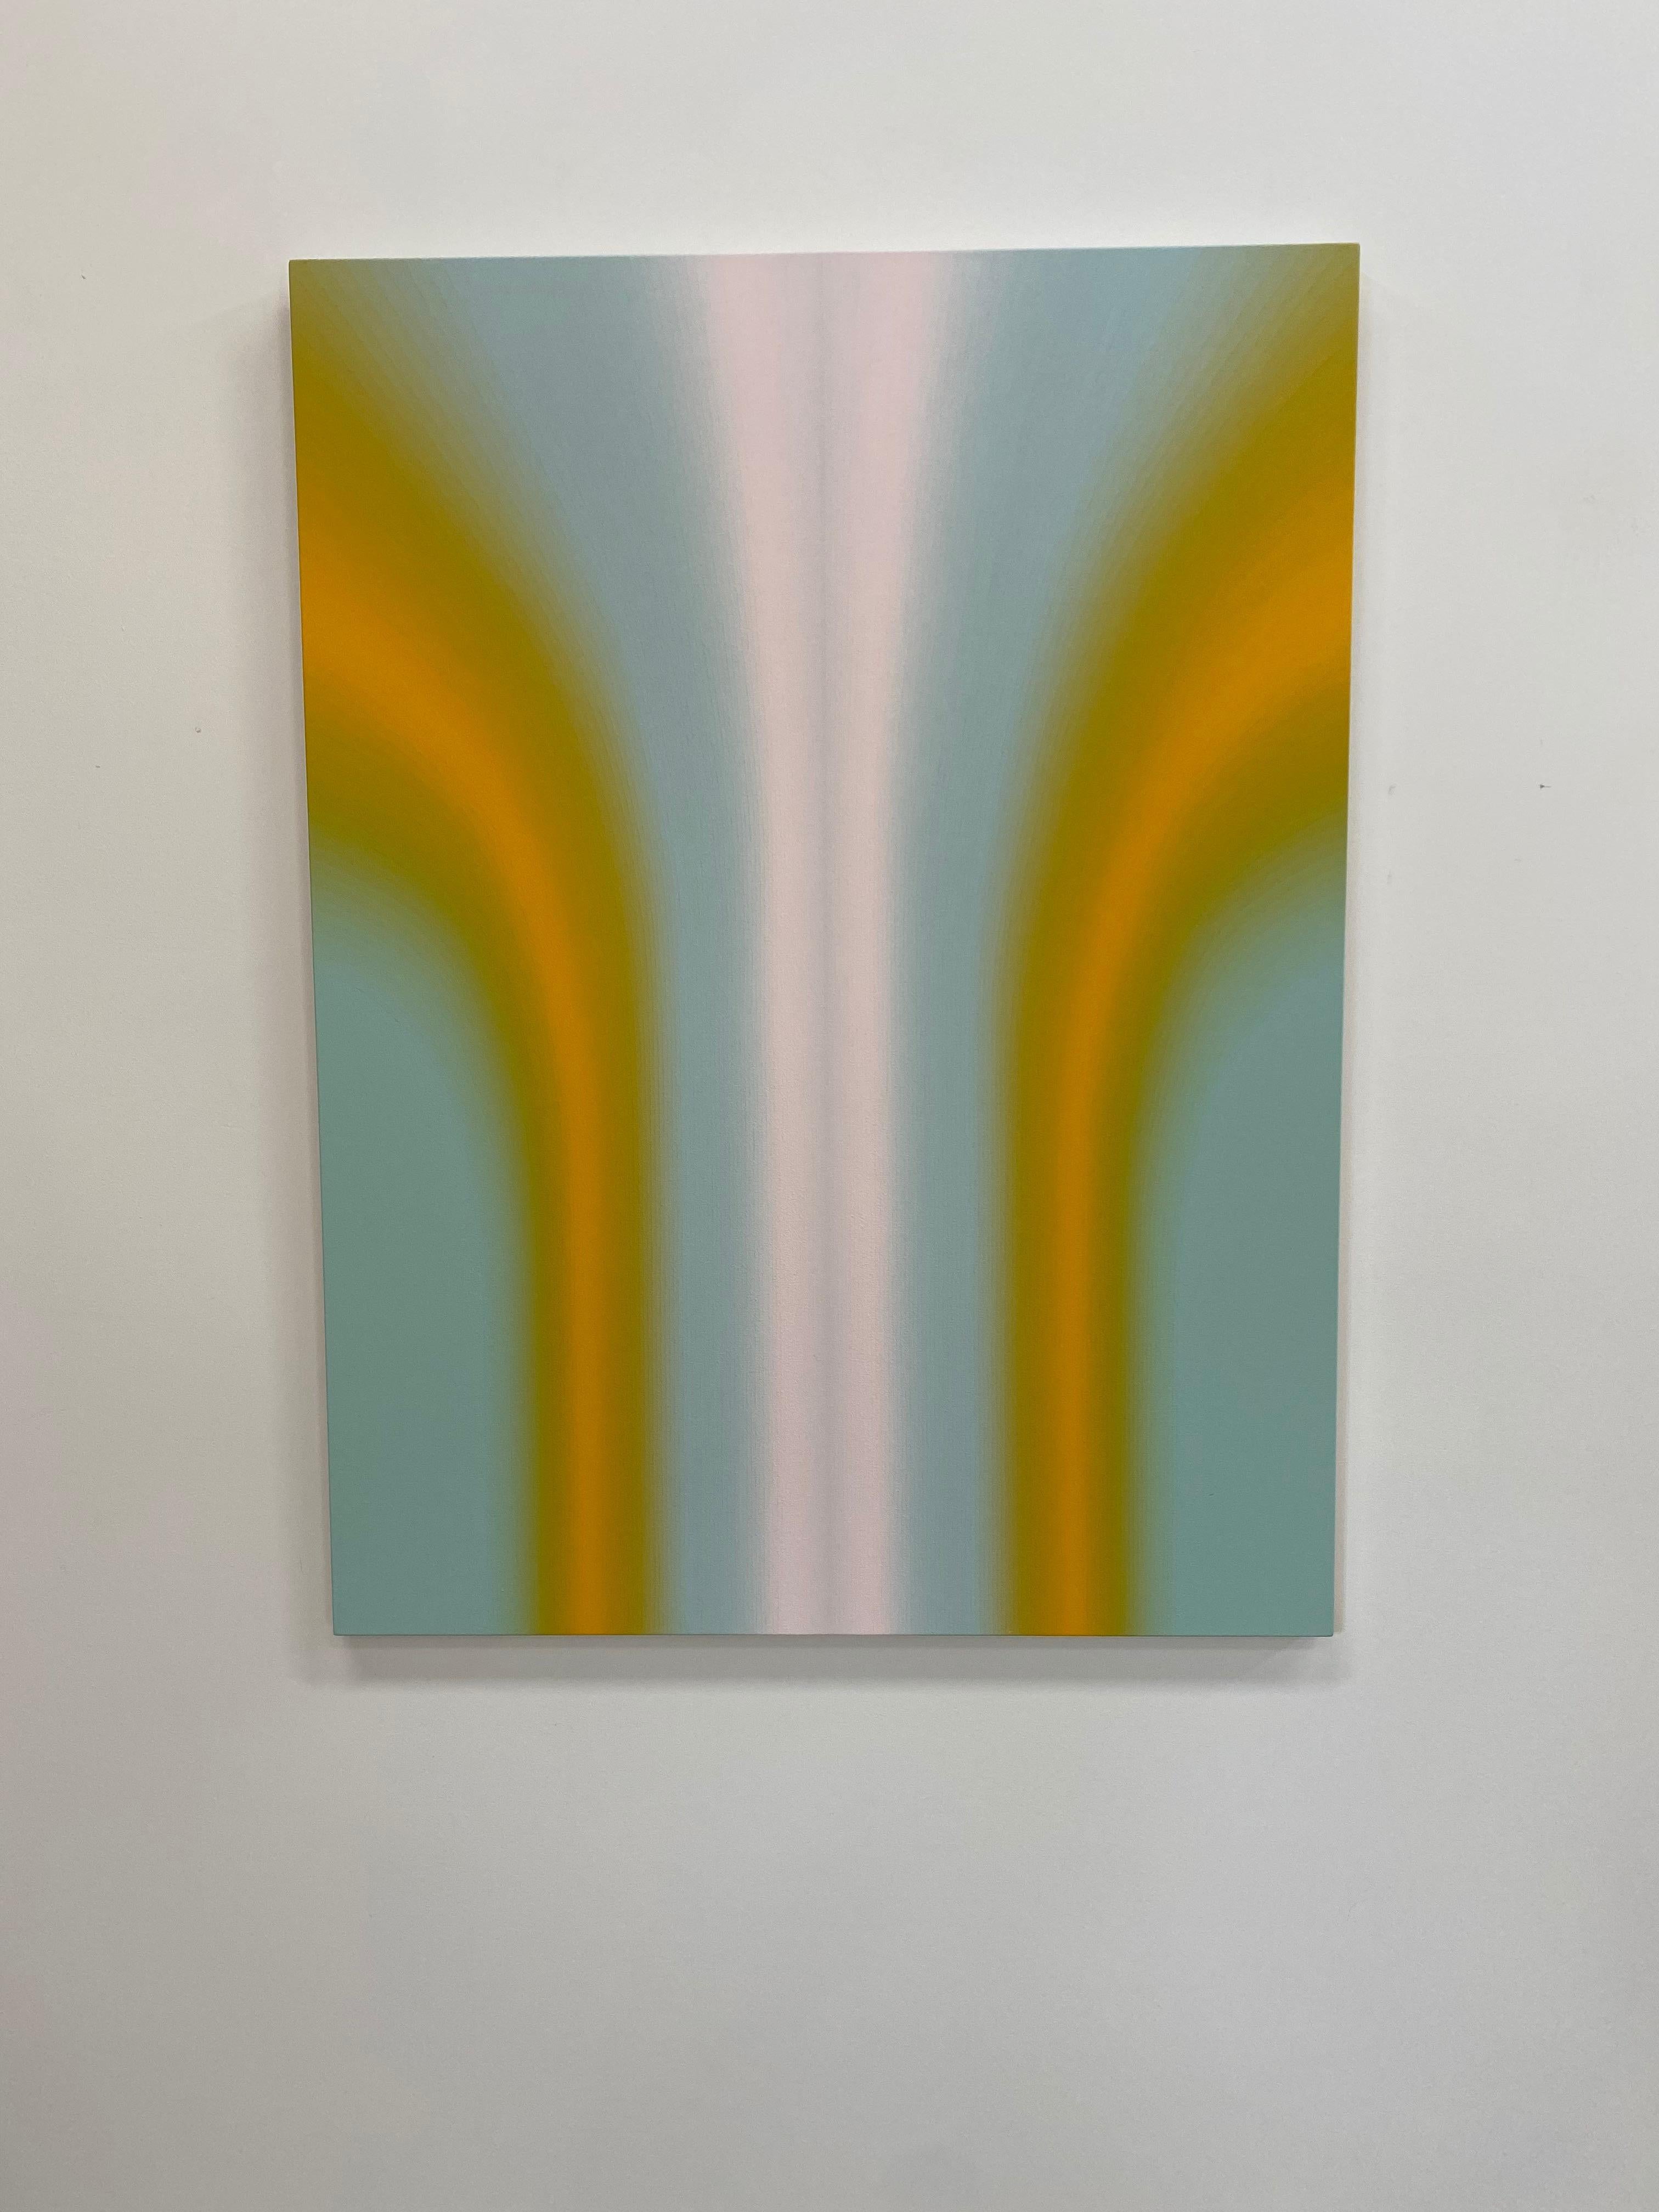 Shadow Valley Six, Light Yellow Orange, Mint Blue, White Gradient Curving Shape - Contemporary Painting by Audrey Stone